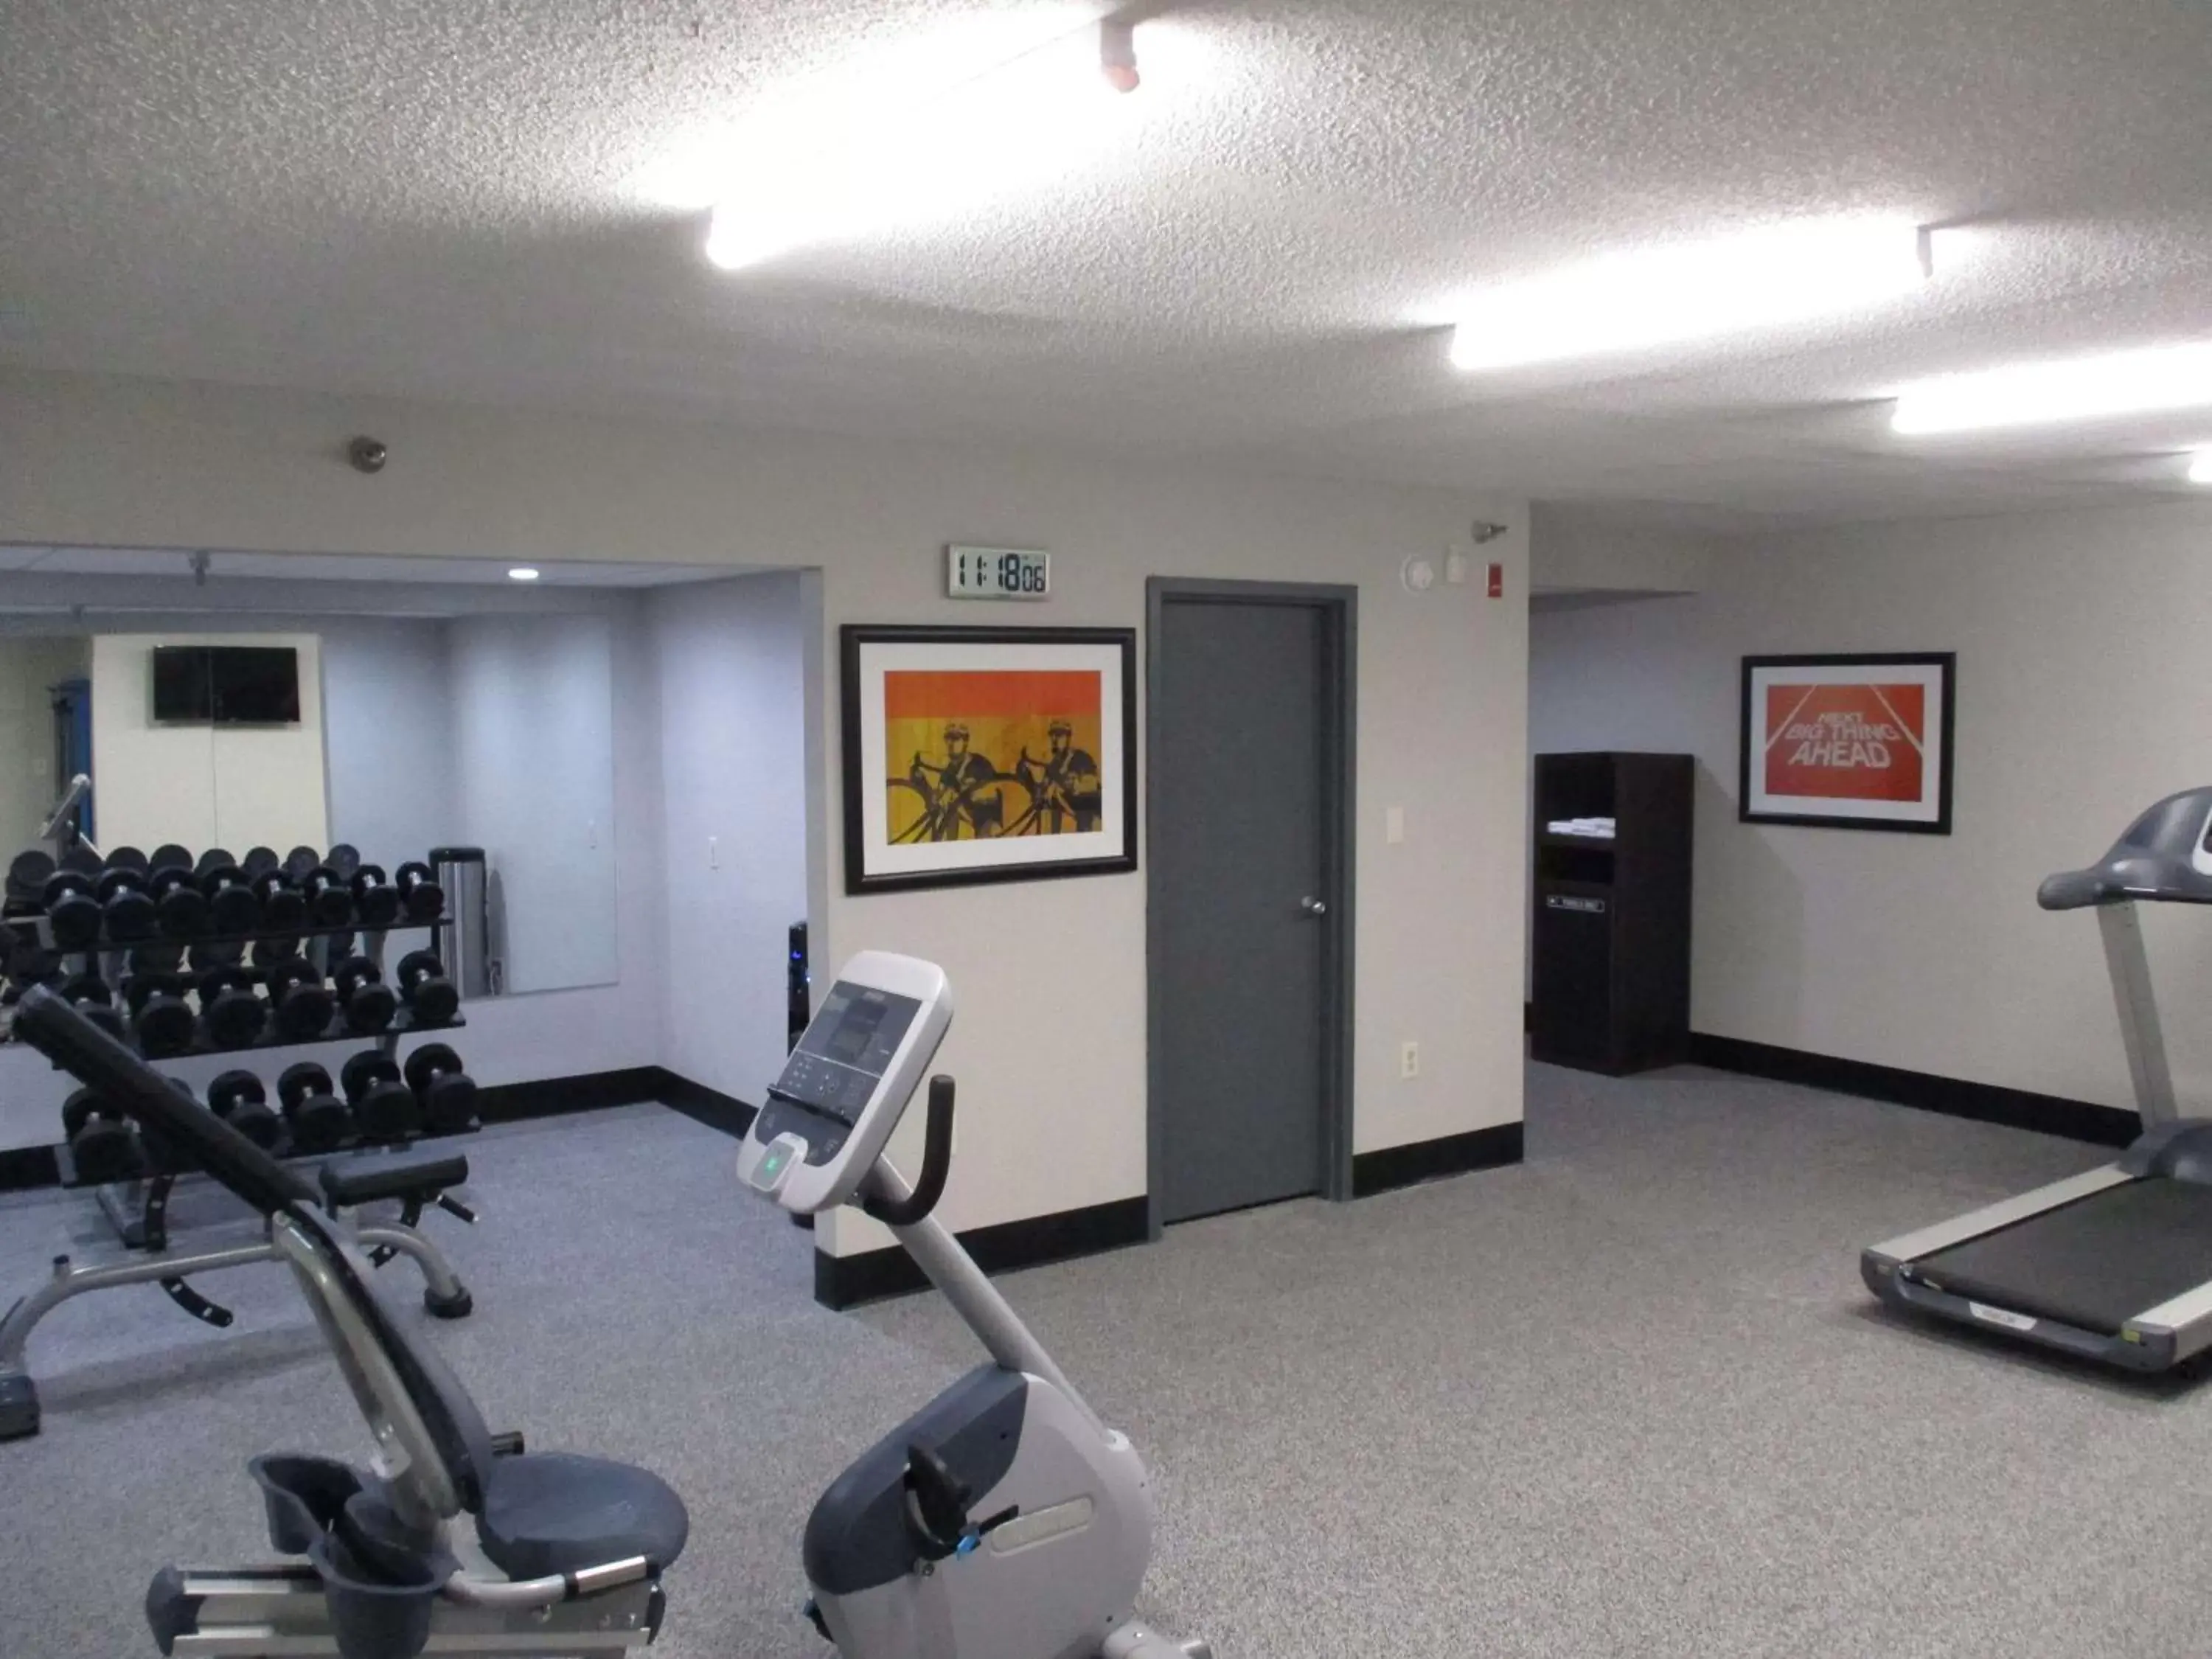 Fitness centre/facilities, Fitness Center/Facilities in Best Western Rock Hill